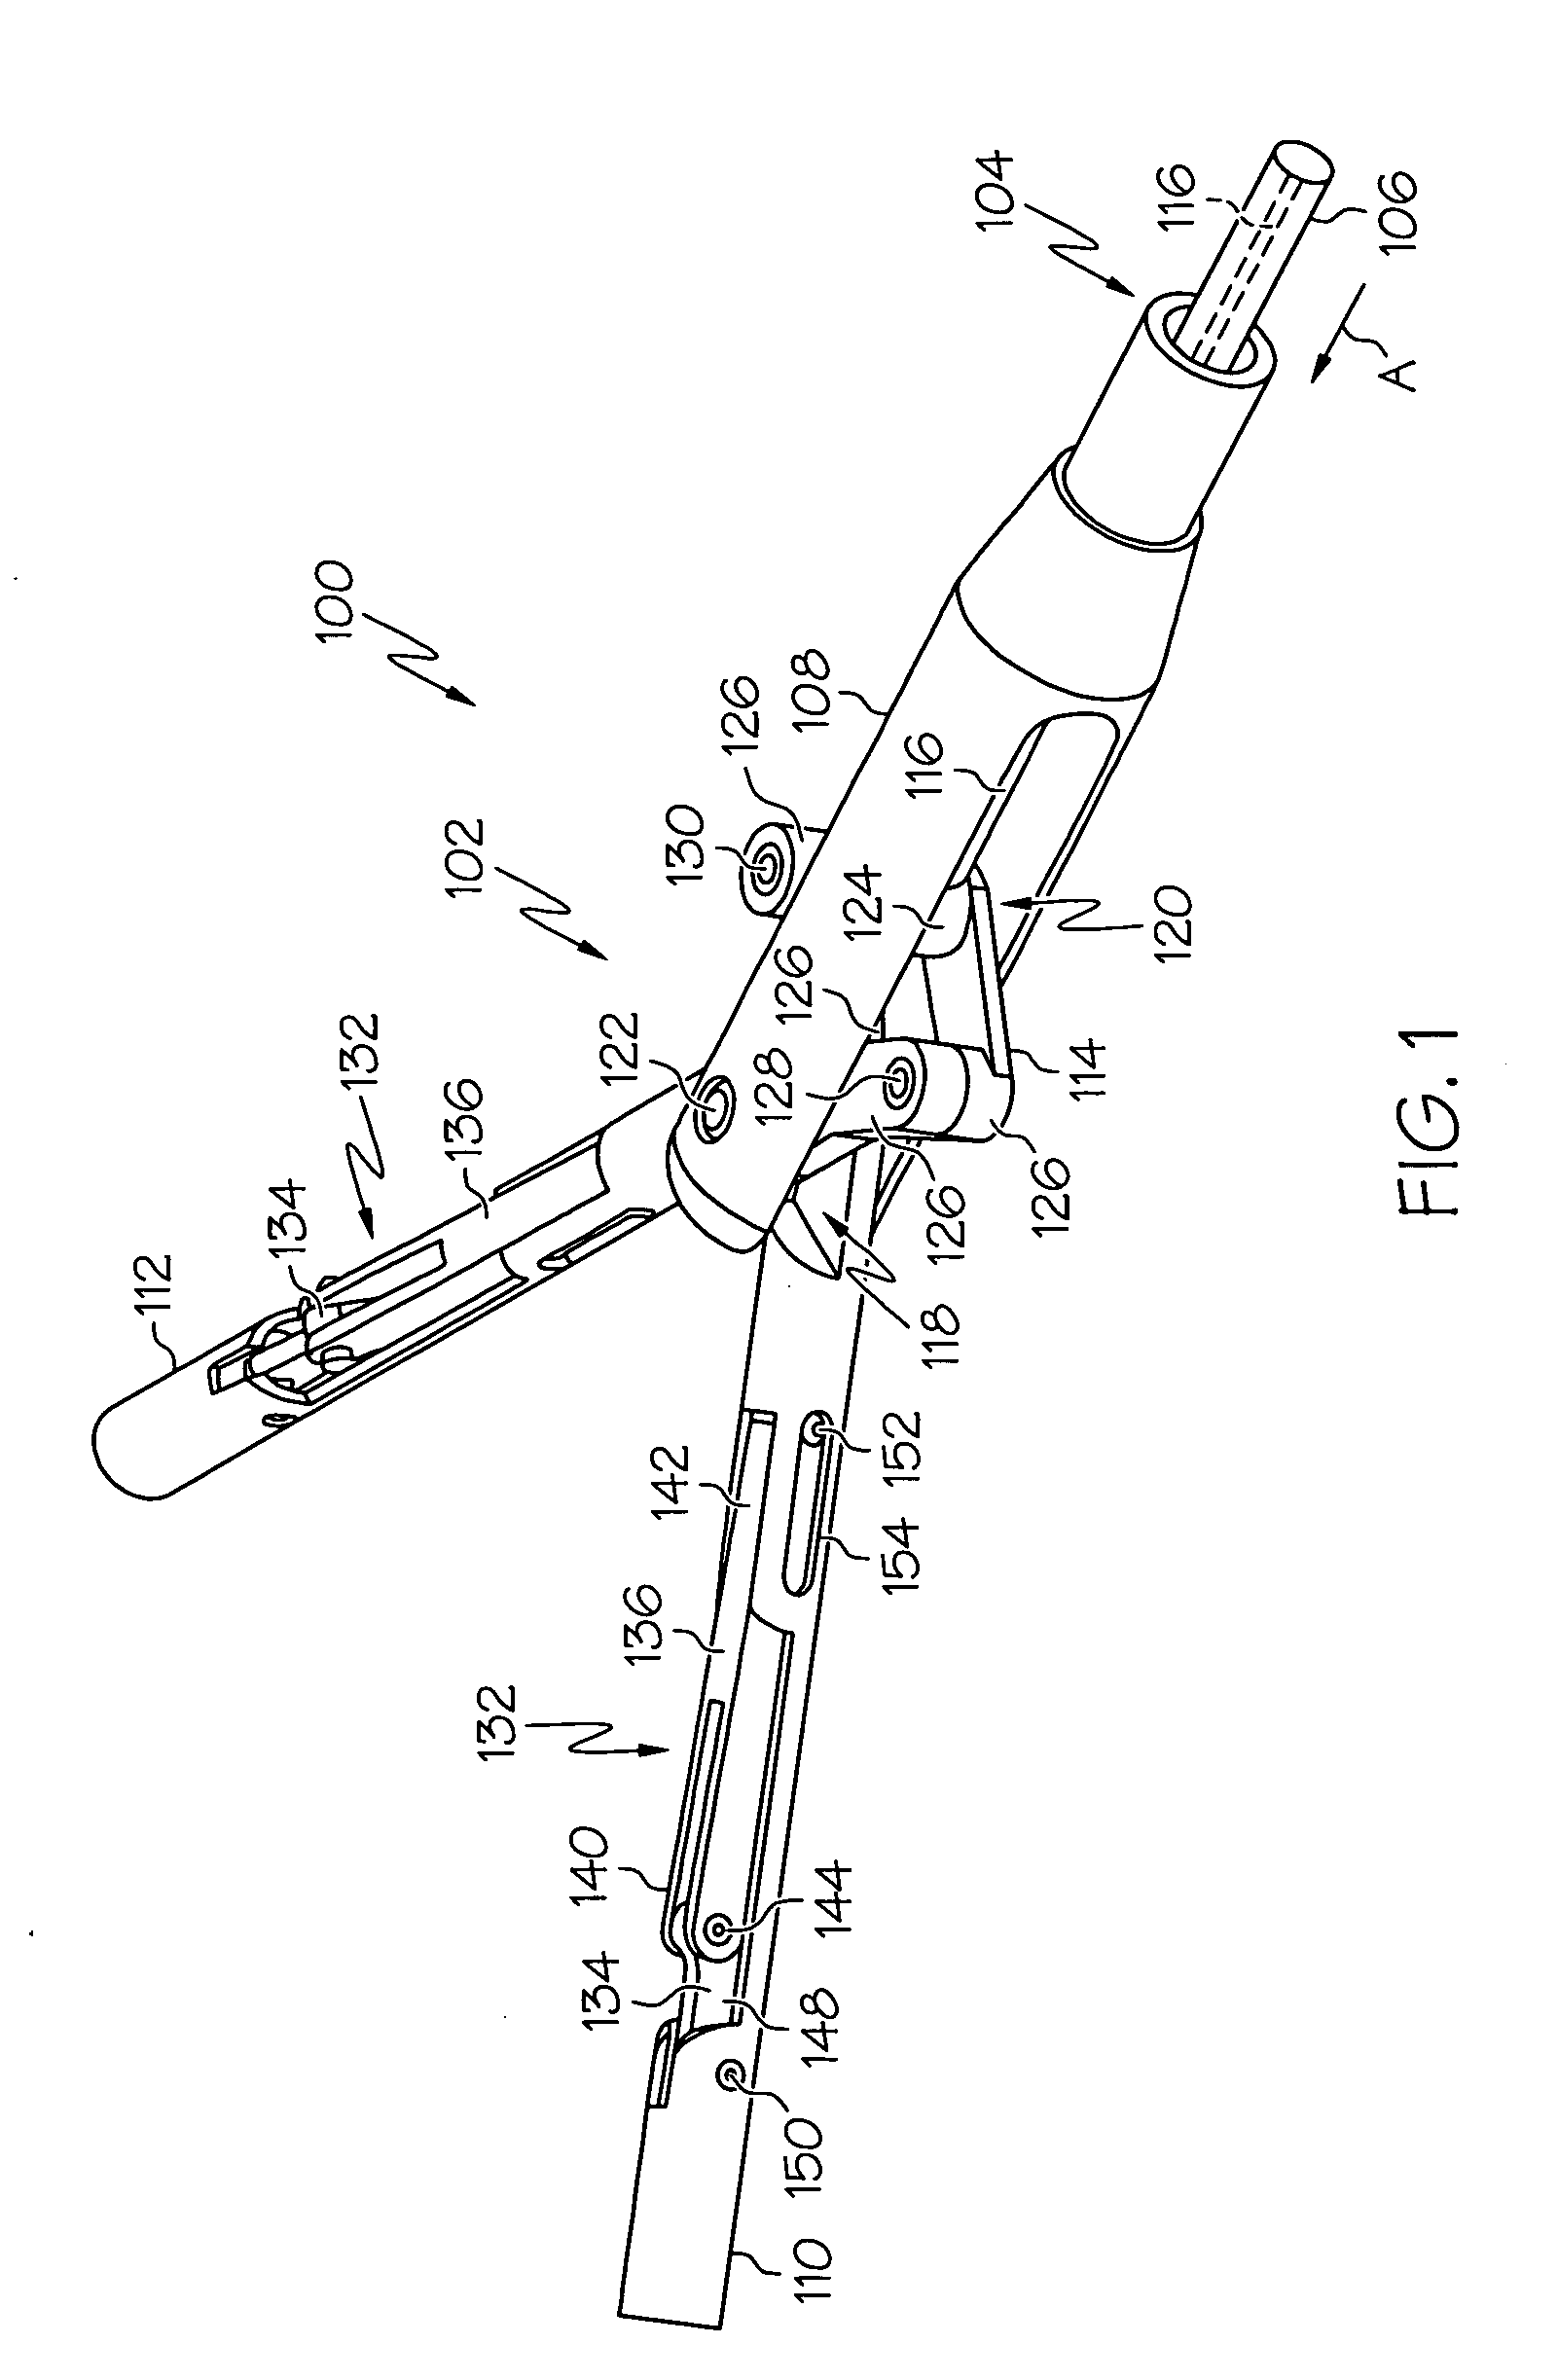 Method for performing an endoscopic mucosal resection